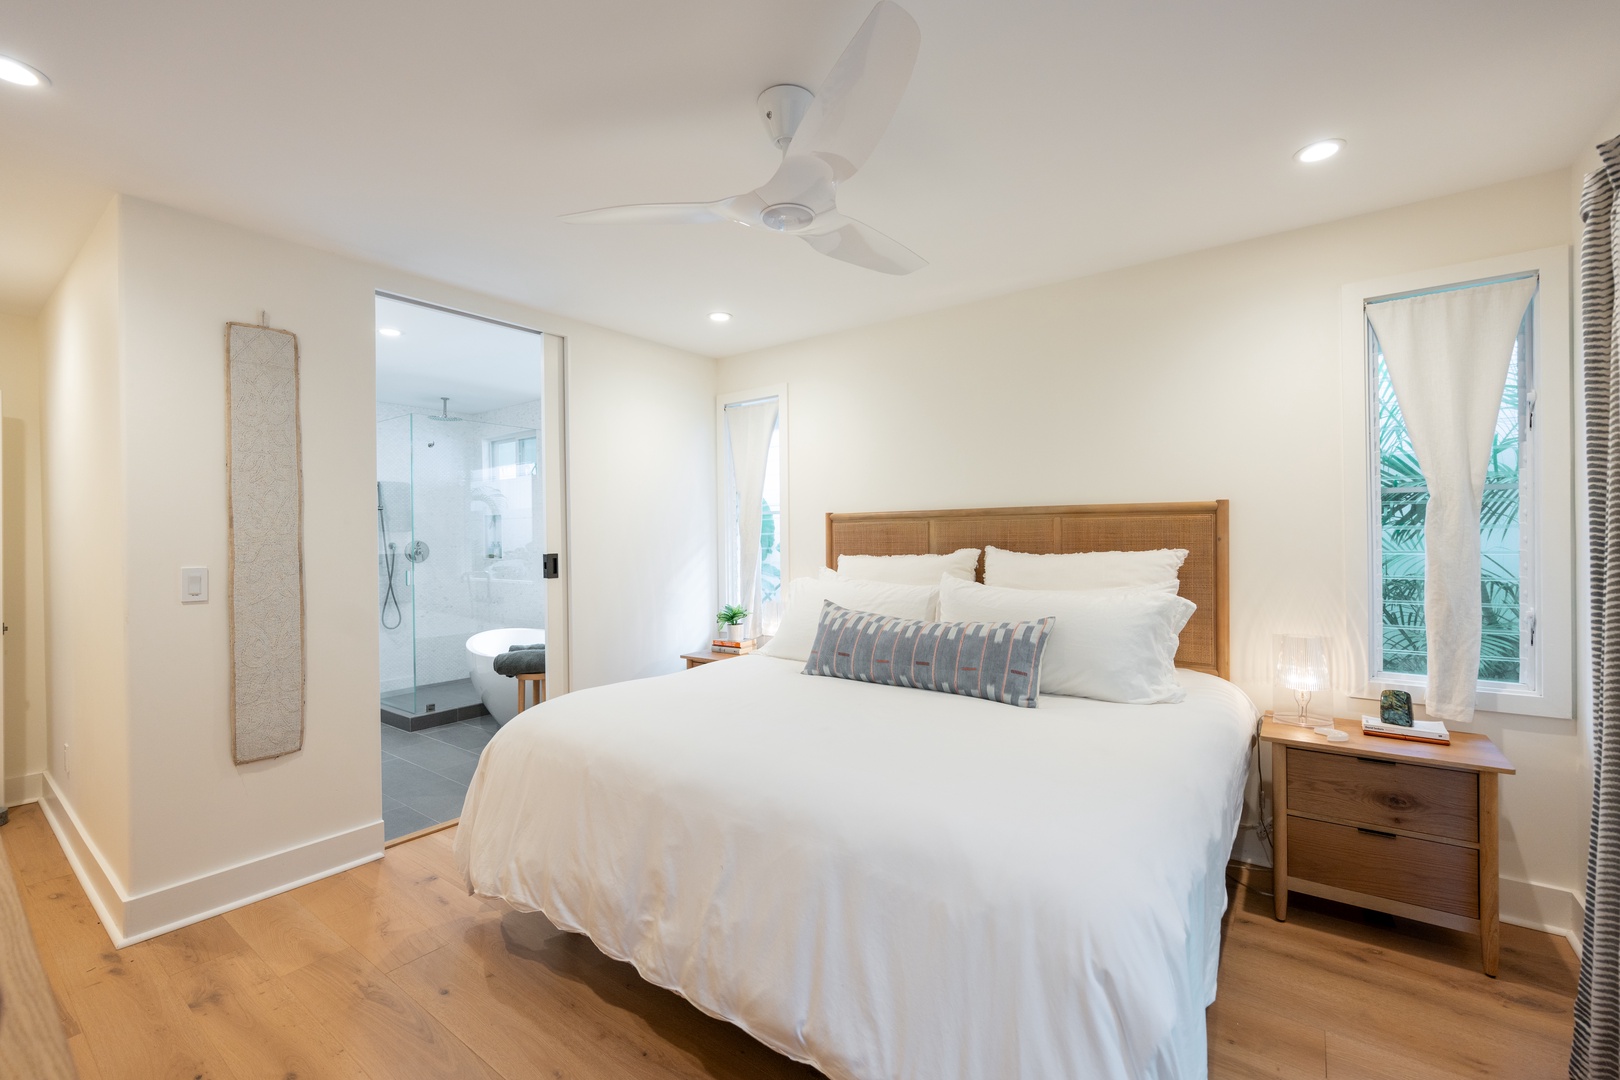 Kailua Vacation Rentals, Lanikai Ola Nani - Experience luxury in our primary suite, complete with a plush king bed and private ensuite.